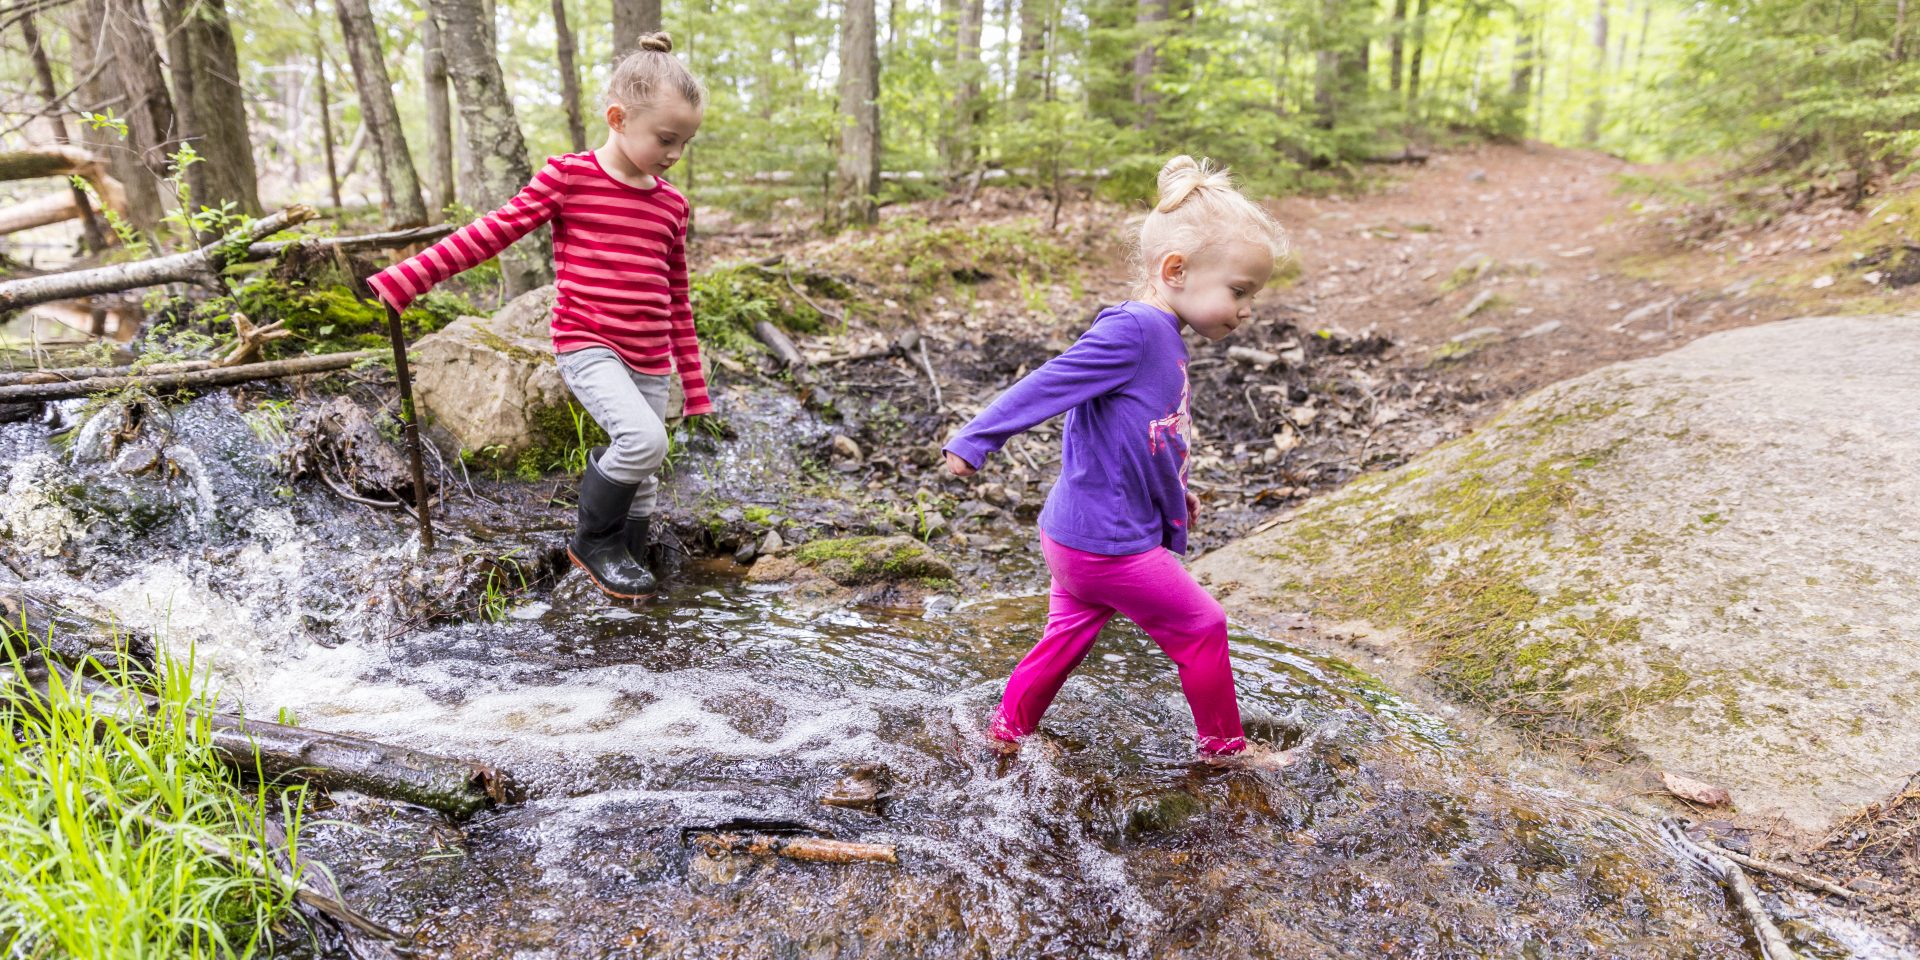 Two young girls play in the woods at the Orris Falls Preserve in South Berwick, Maine.